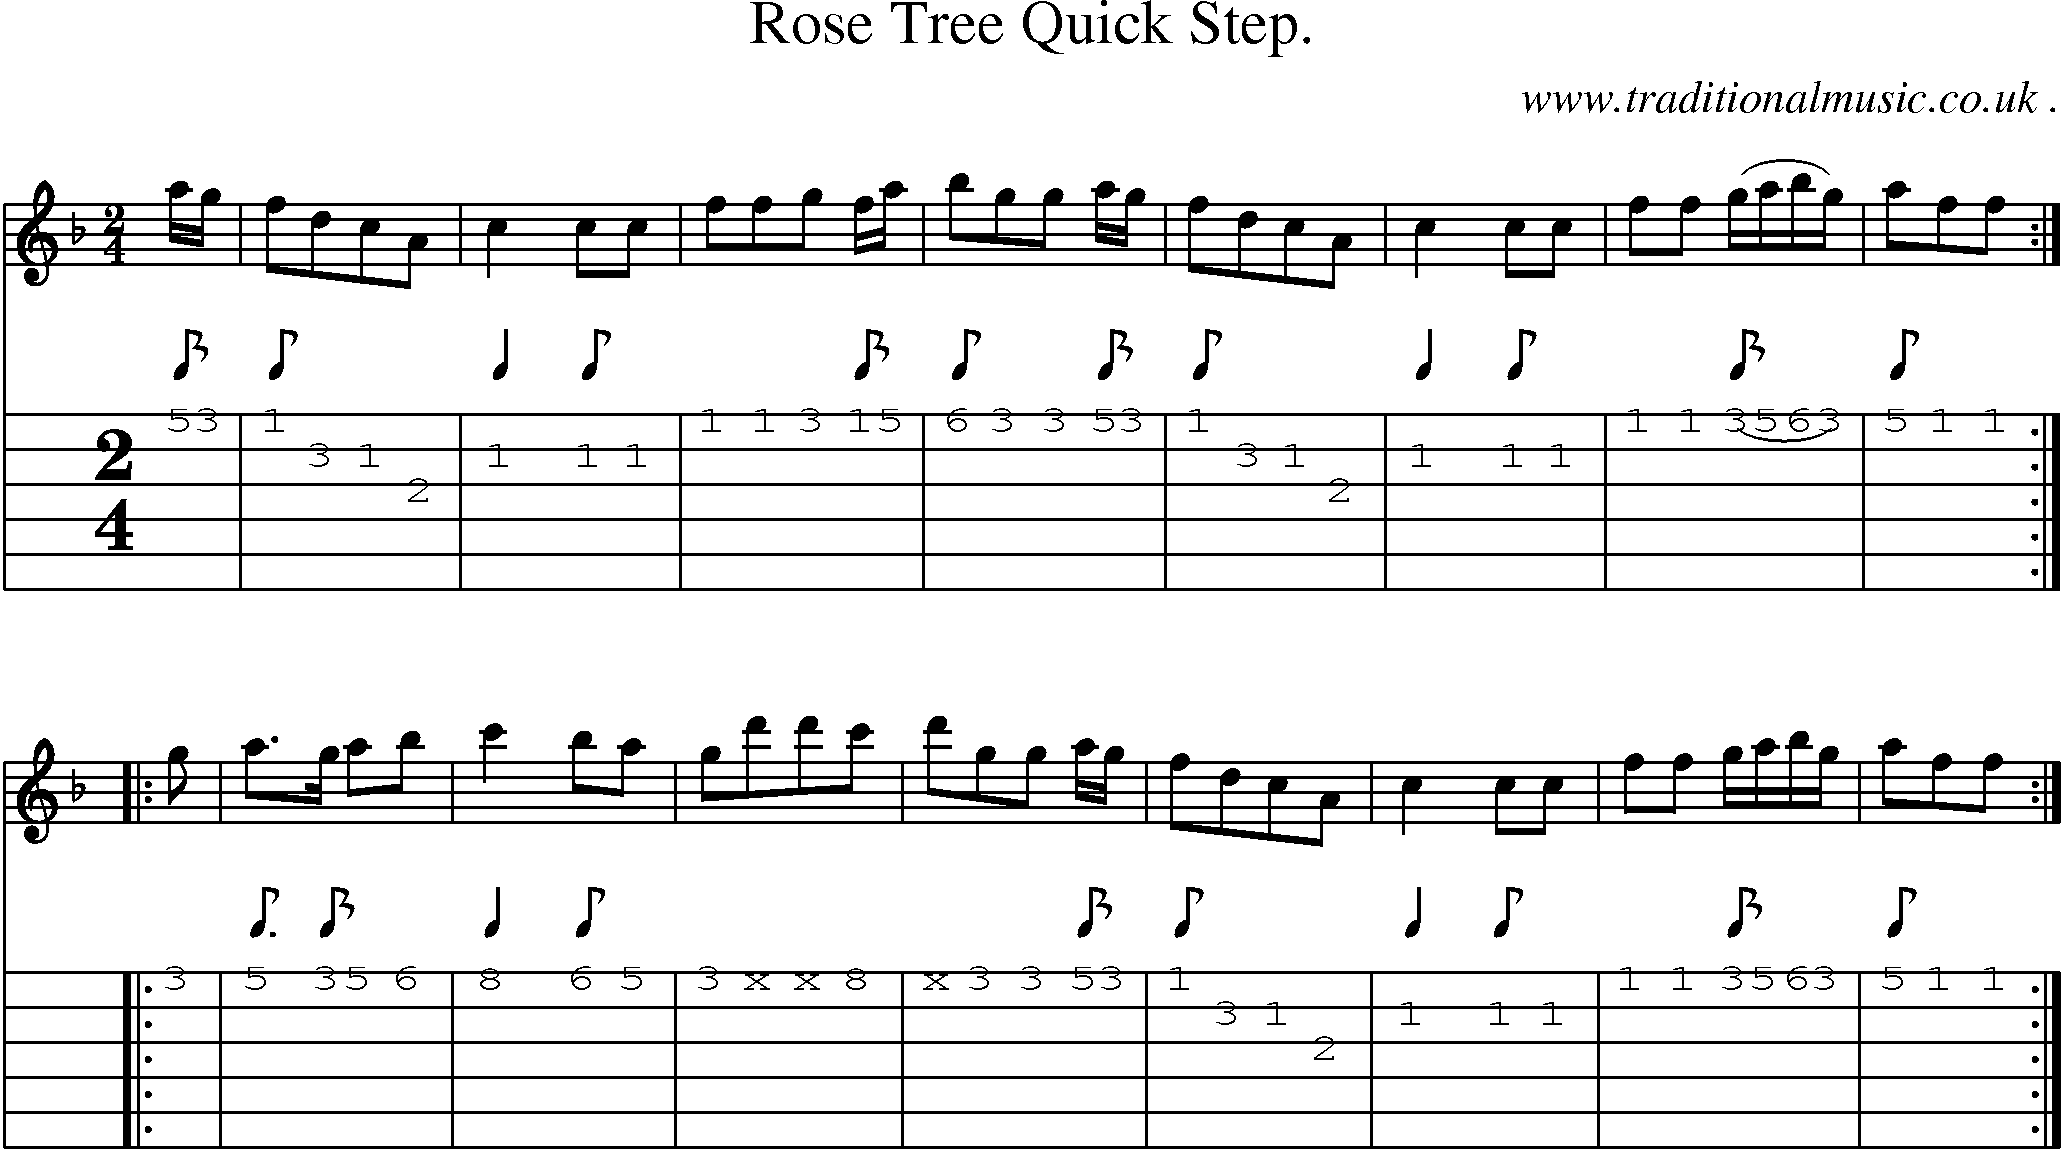 Sheet-Music and Guitar Tabs for Rose Tree Quick Step